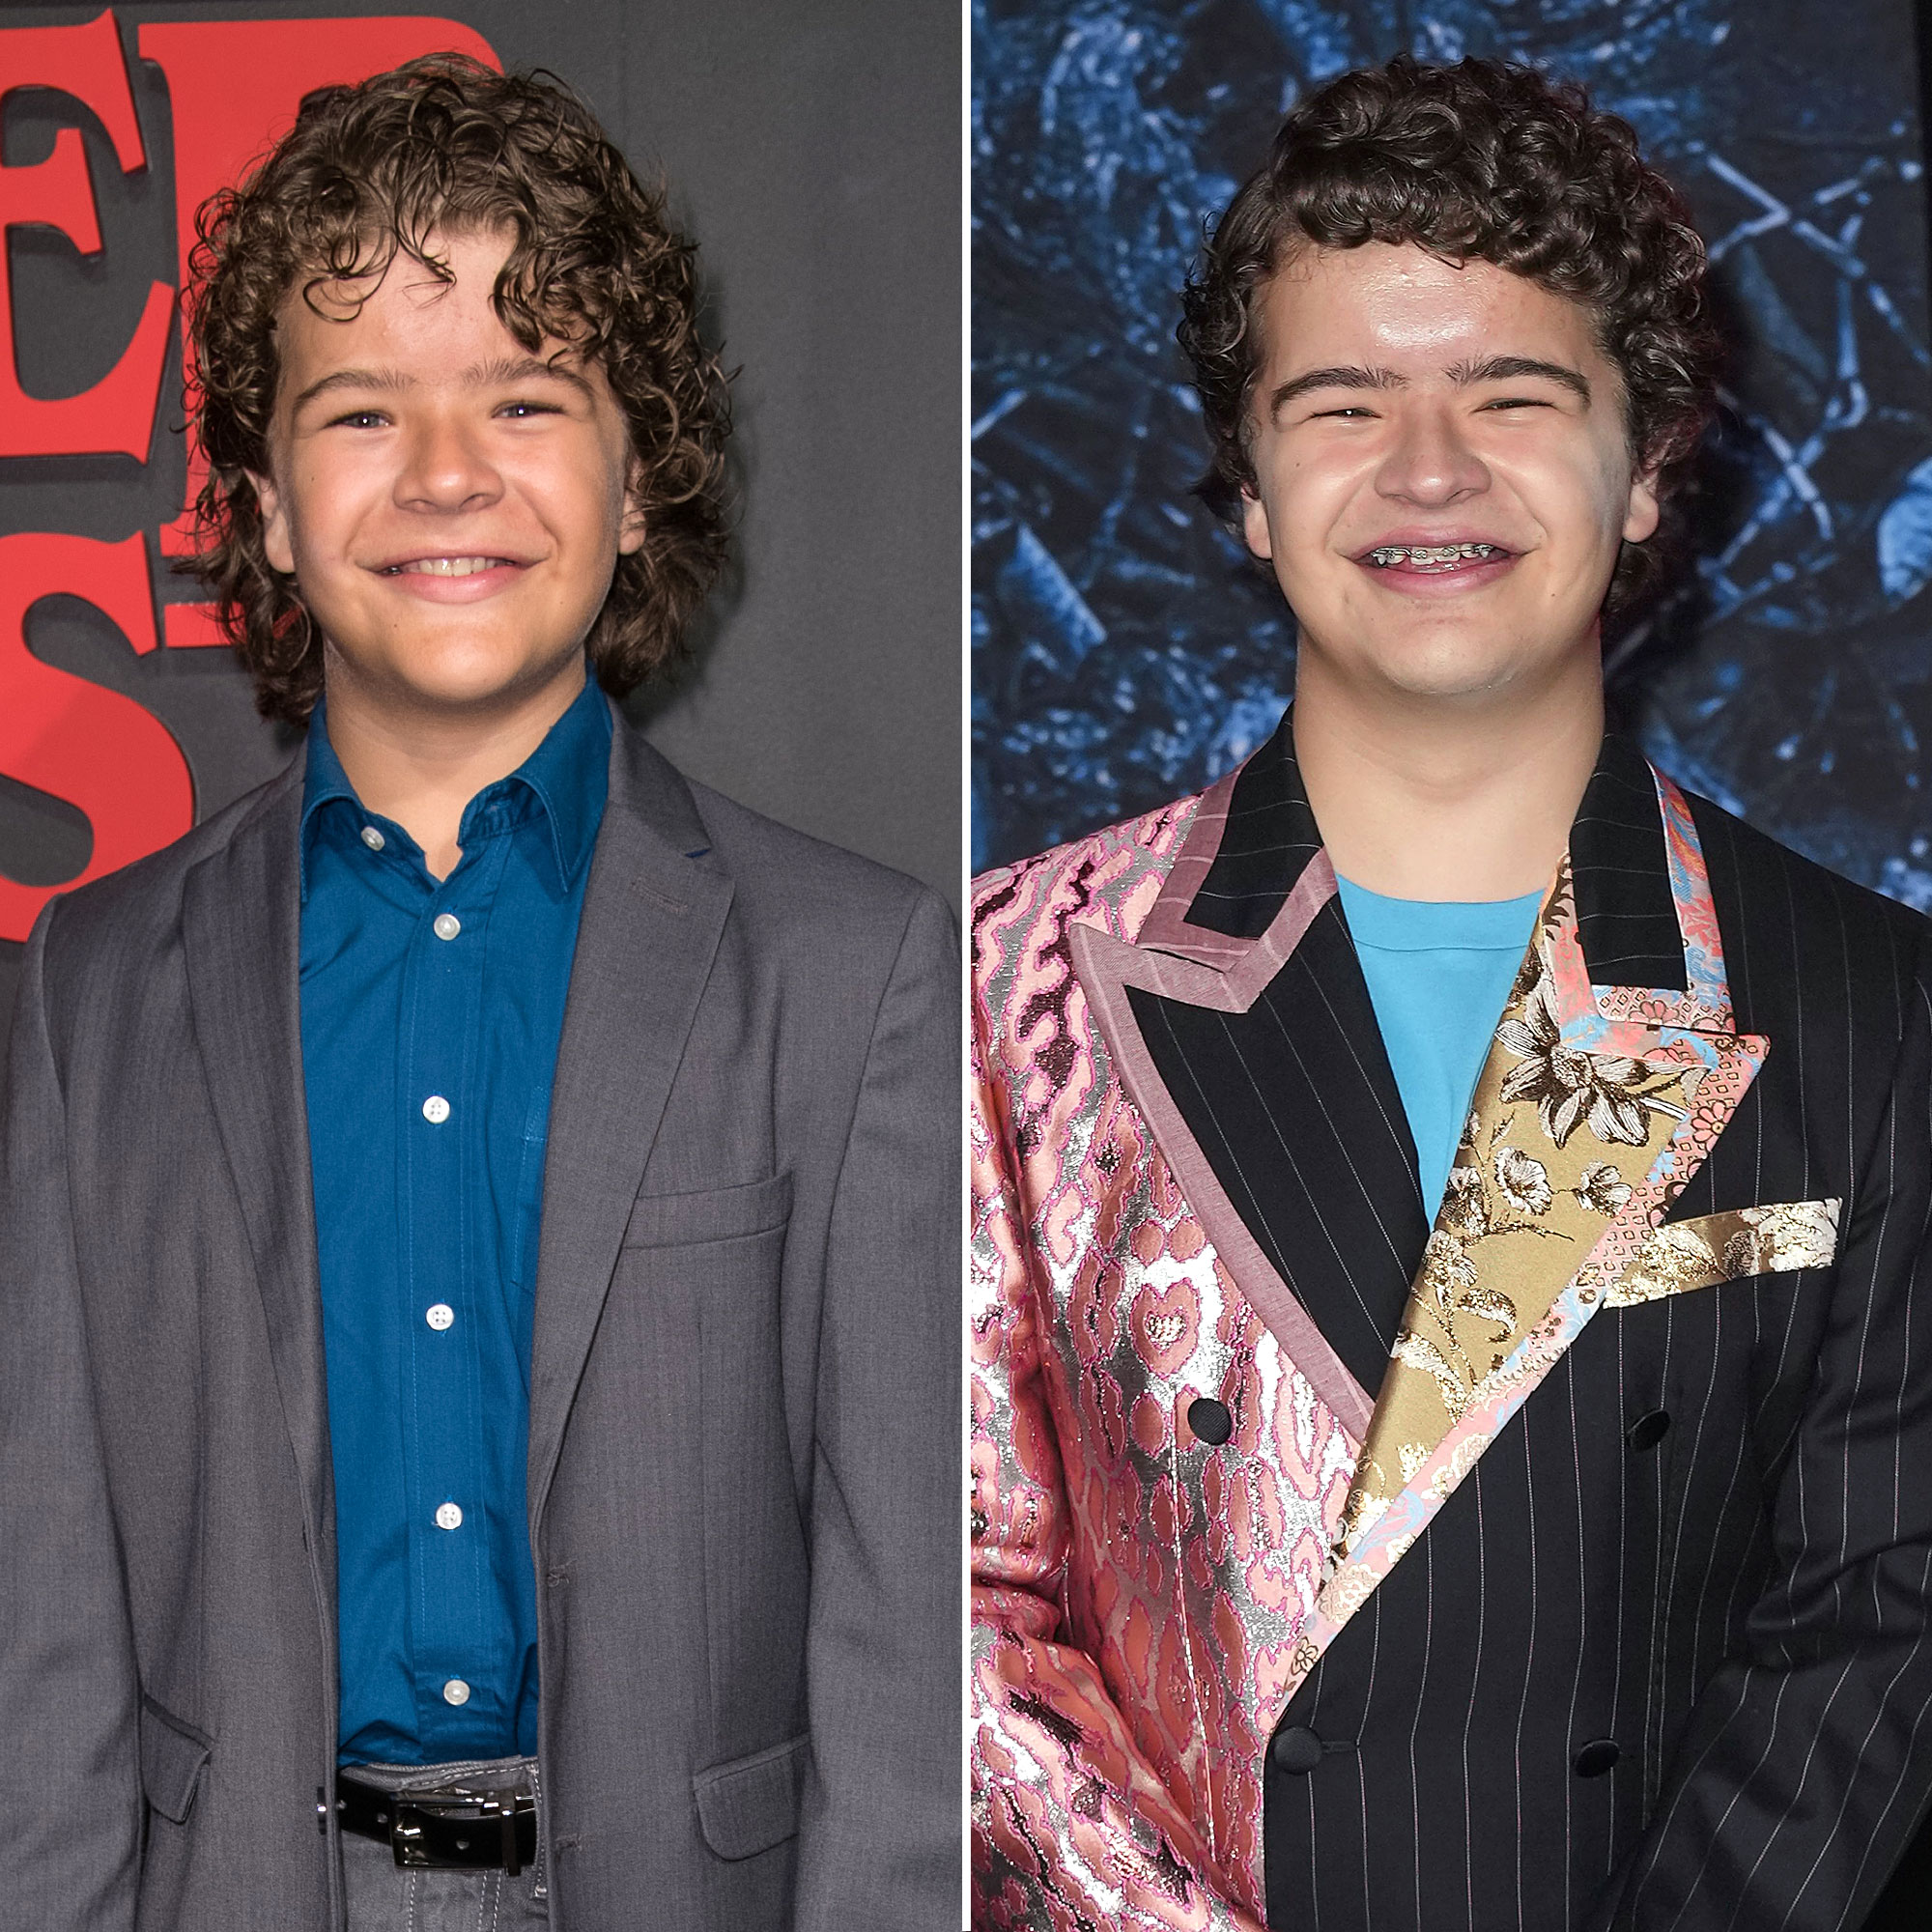 Stranger Things cast for season 4  List of characters and actors